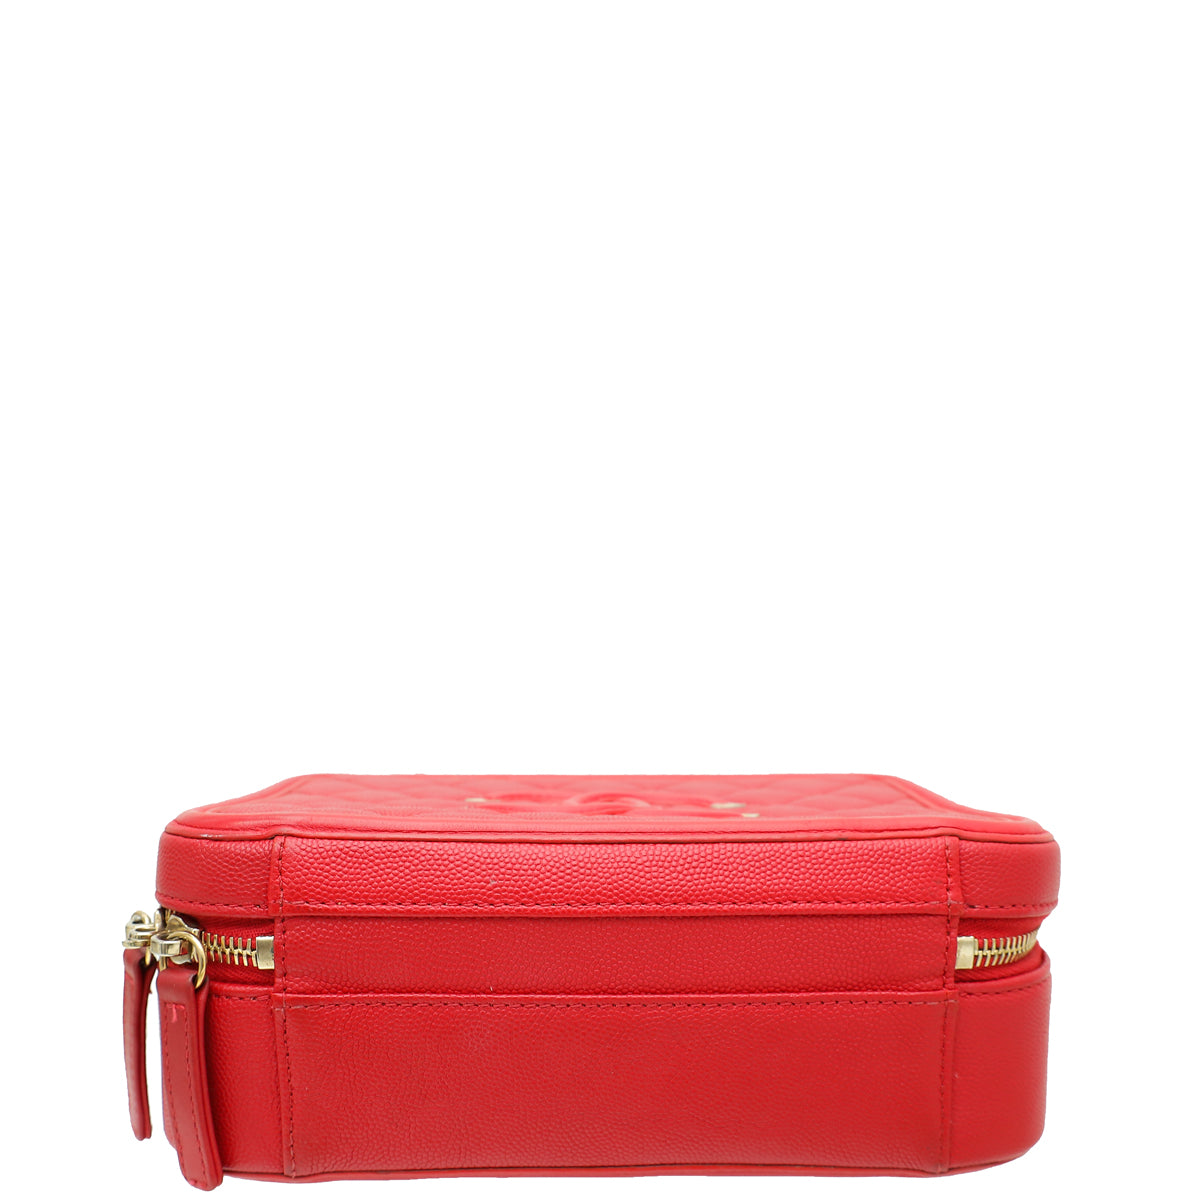 Chanel Red CC Filigree Small Vanity Case